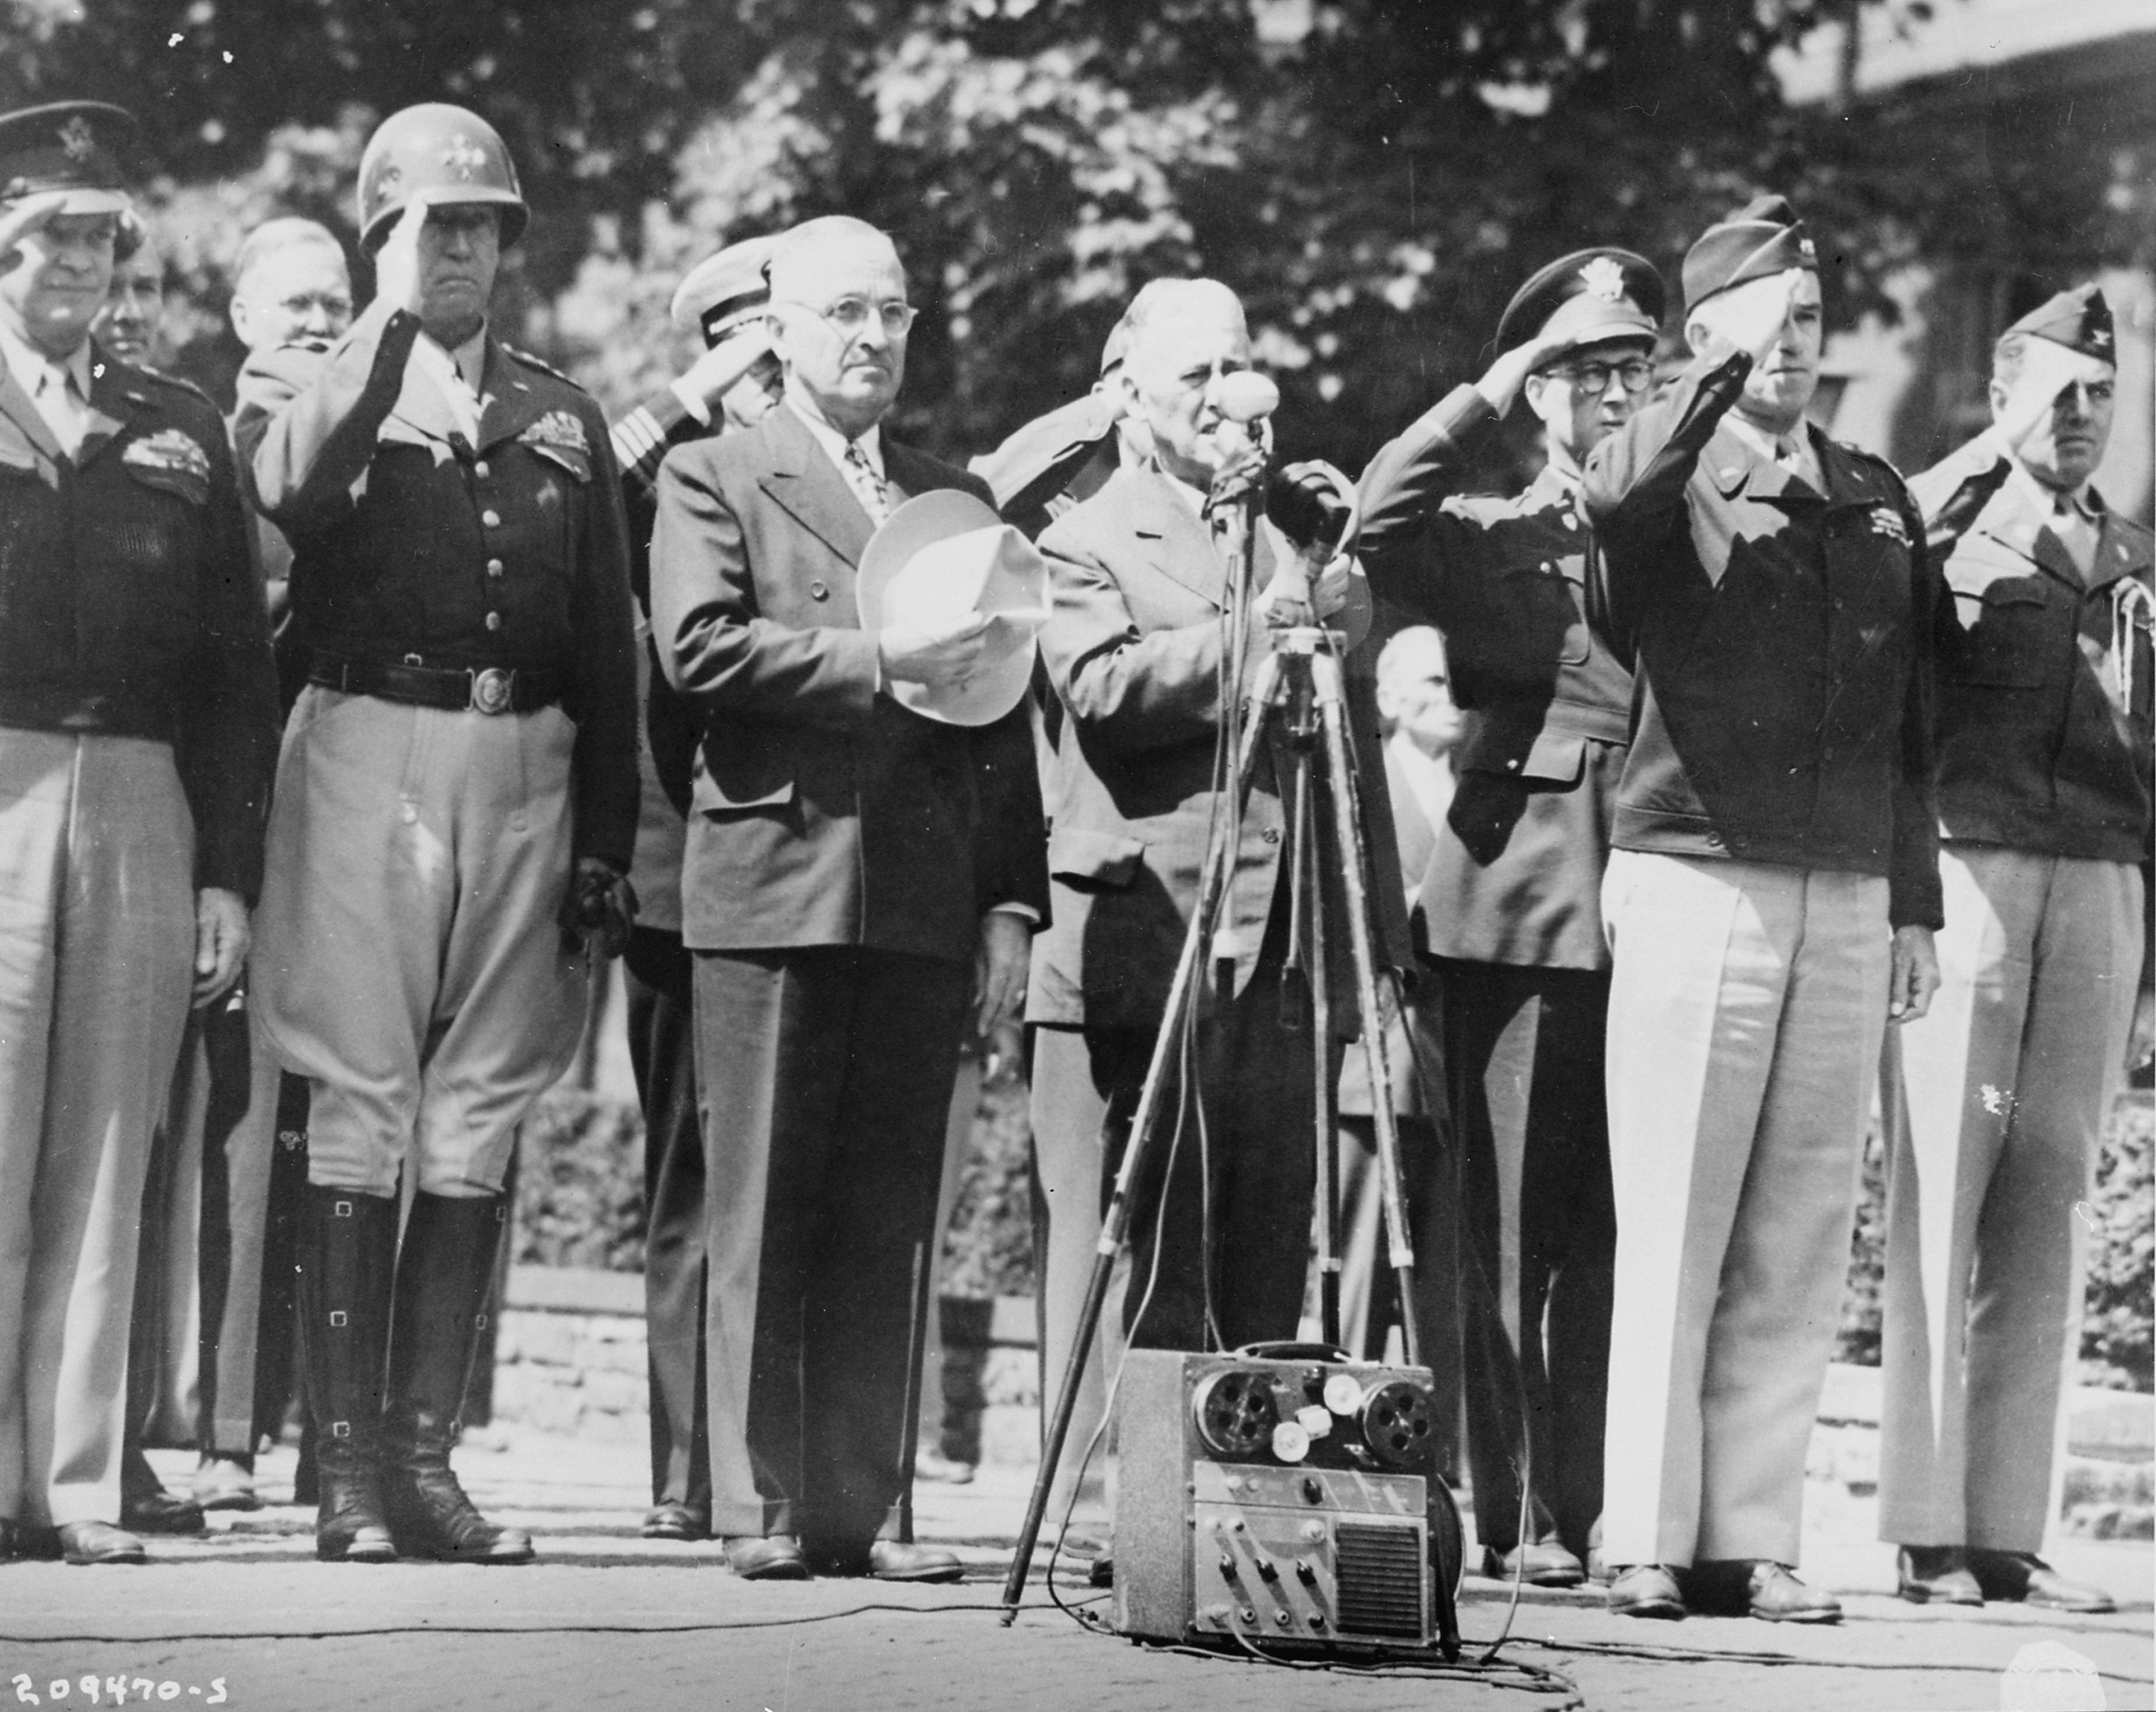 Dwight Eisenhower, George Patton, Harry Truman, Henry Stimson, Omar Bradley, and others during the raising of a US flag over Berlin, Germany, 20 Jul 1945